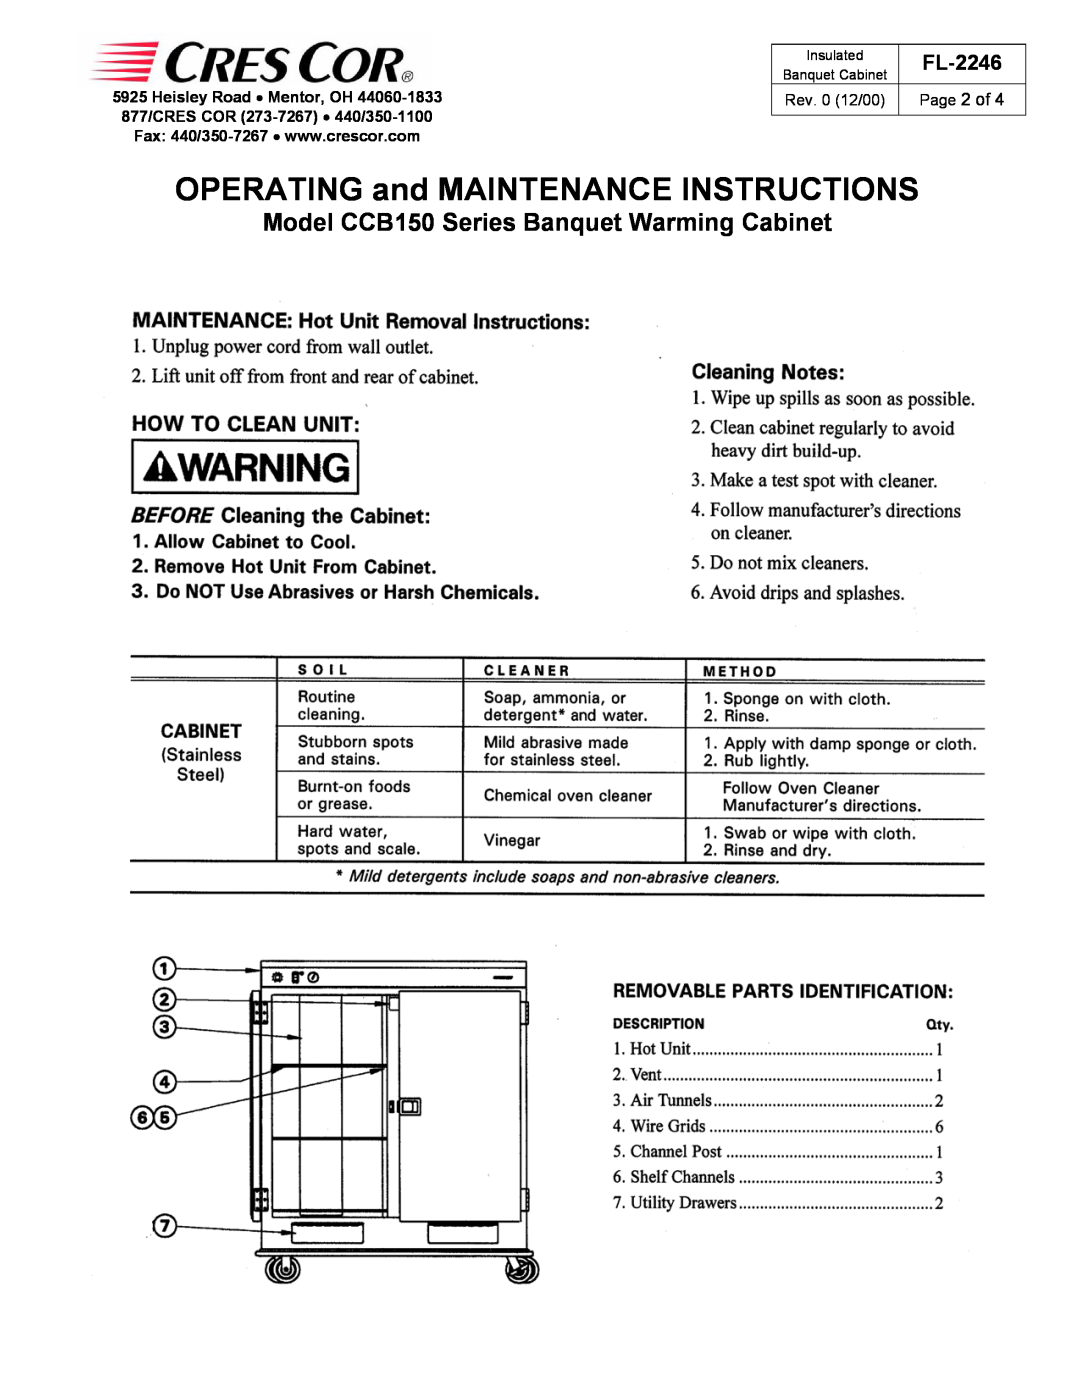 Cres Cor Rev. 0 12/00, OPERATING and MAINTENANCE INSTRUCTIONS, Model CCB150 Series Banquet Warming Cabinet 